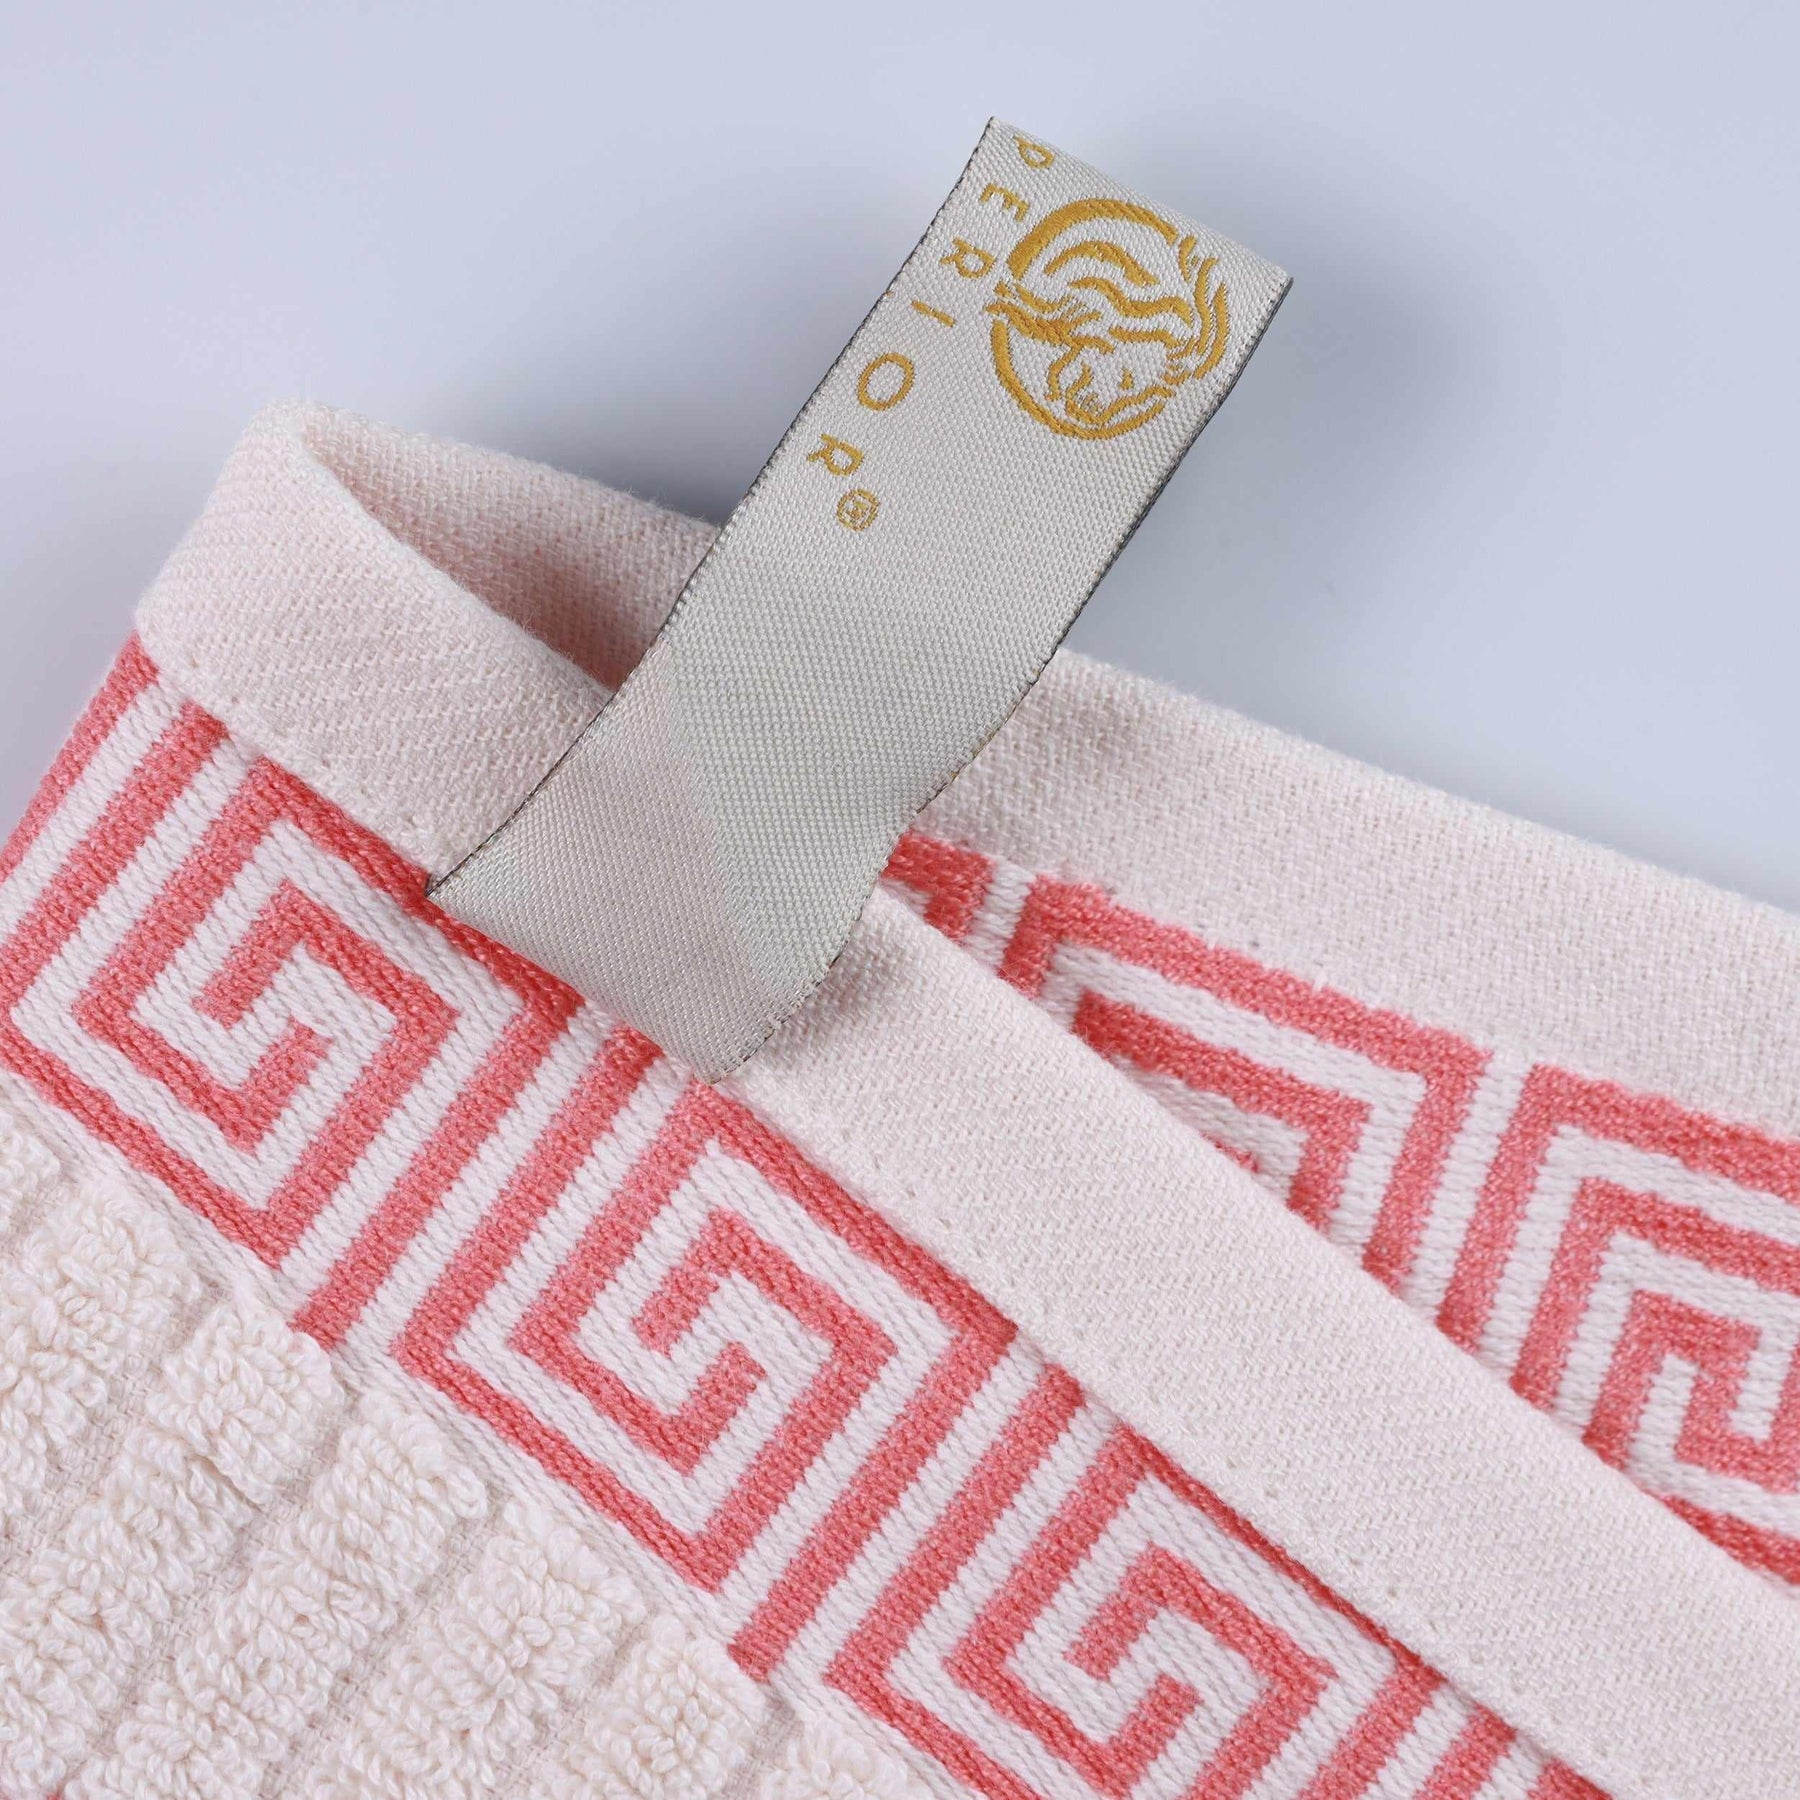 Superior Athens Cotton 8-Piece Towel Set with Greek Scroll and Floral Pattern - Ivory-Coral